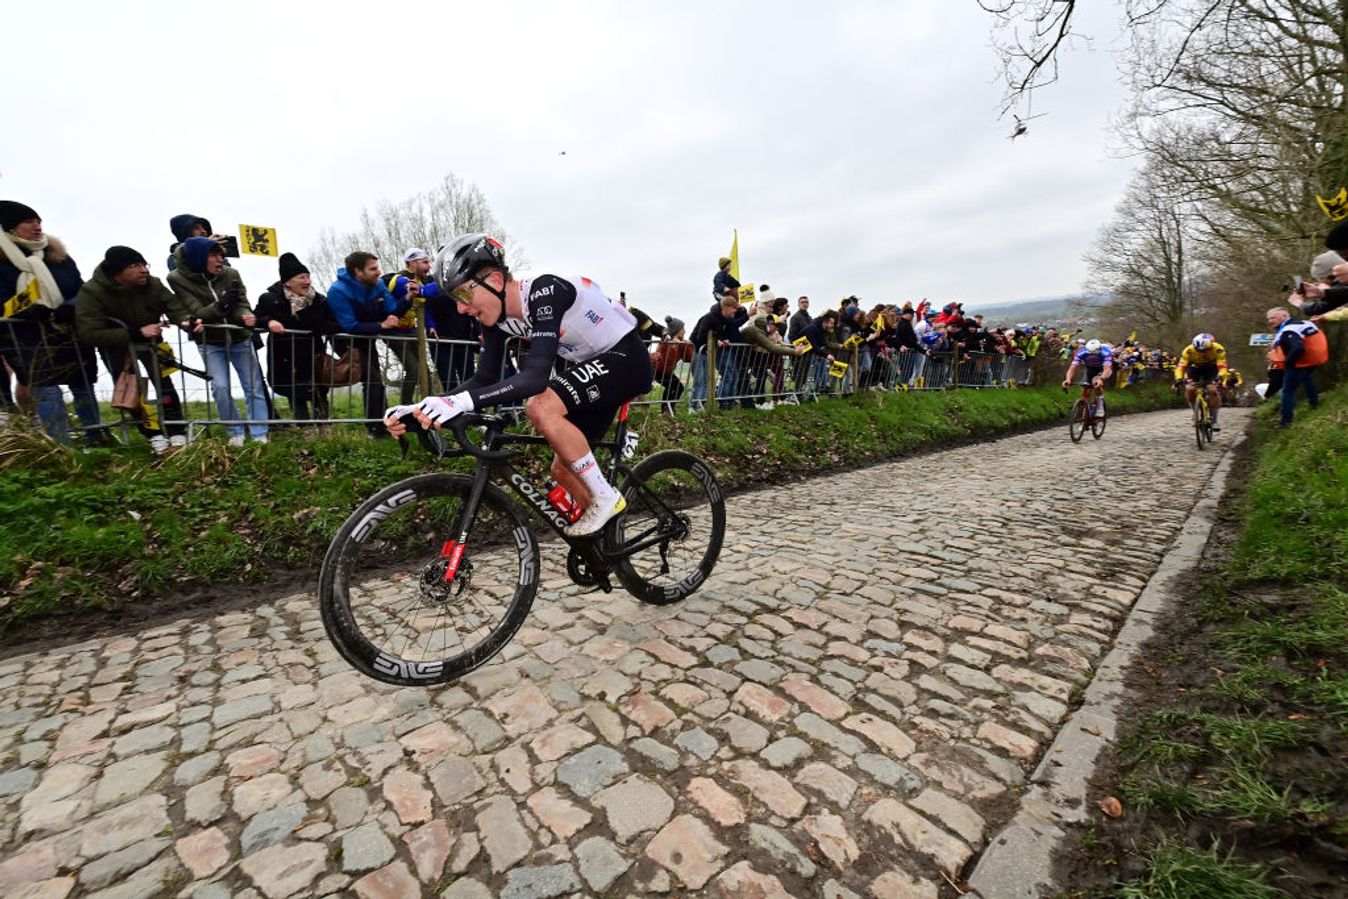 Van der Poel admitted that Pogacar's set-up at Flanders last year gave him the upper hand on the cobbles